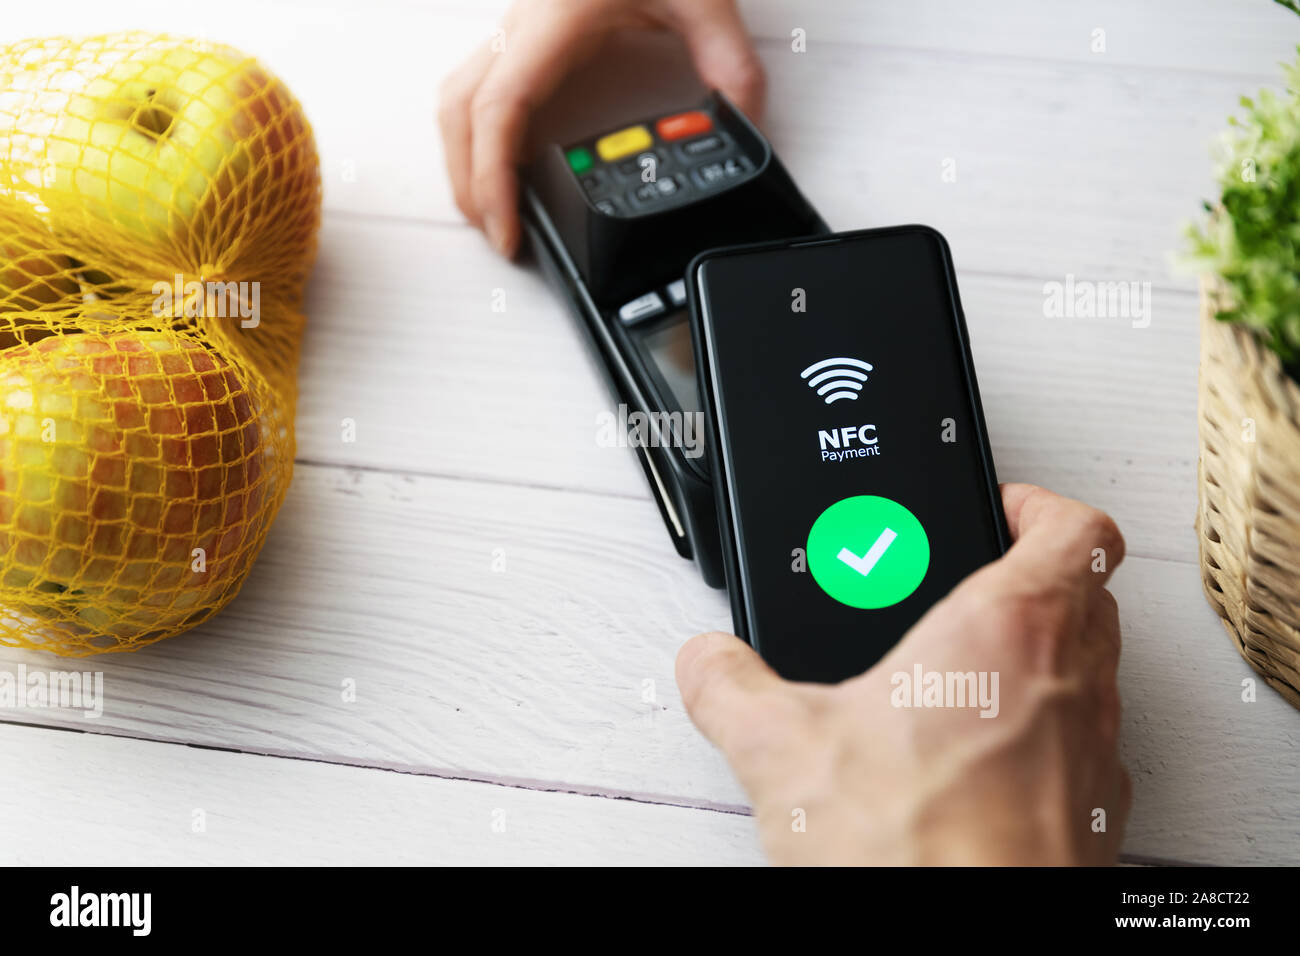 nfc contactless payment with phone at groceries store Stock Photo